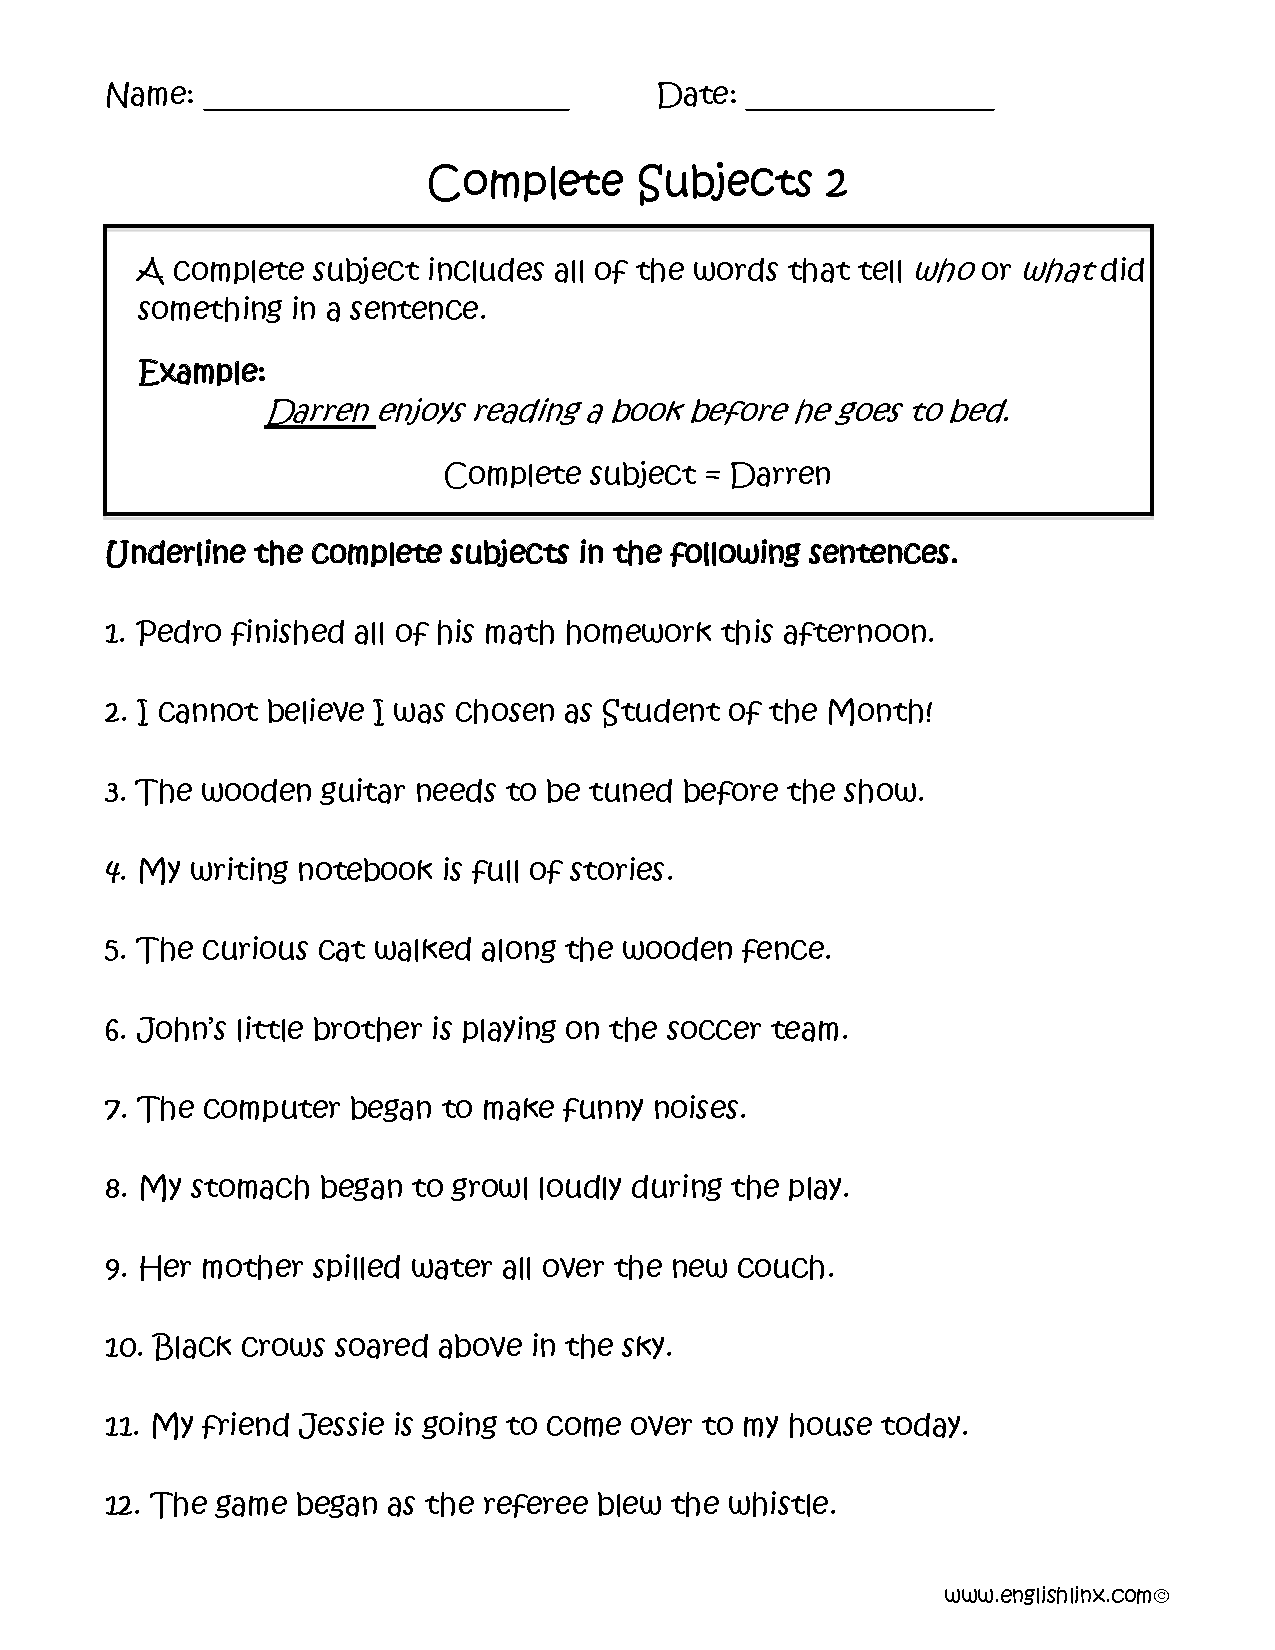 Complete Subjects Worksheets Part 2